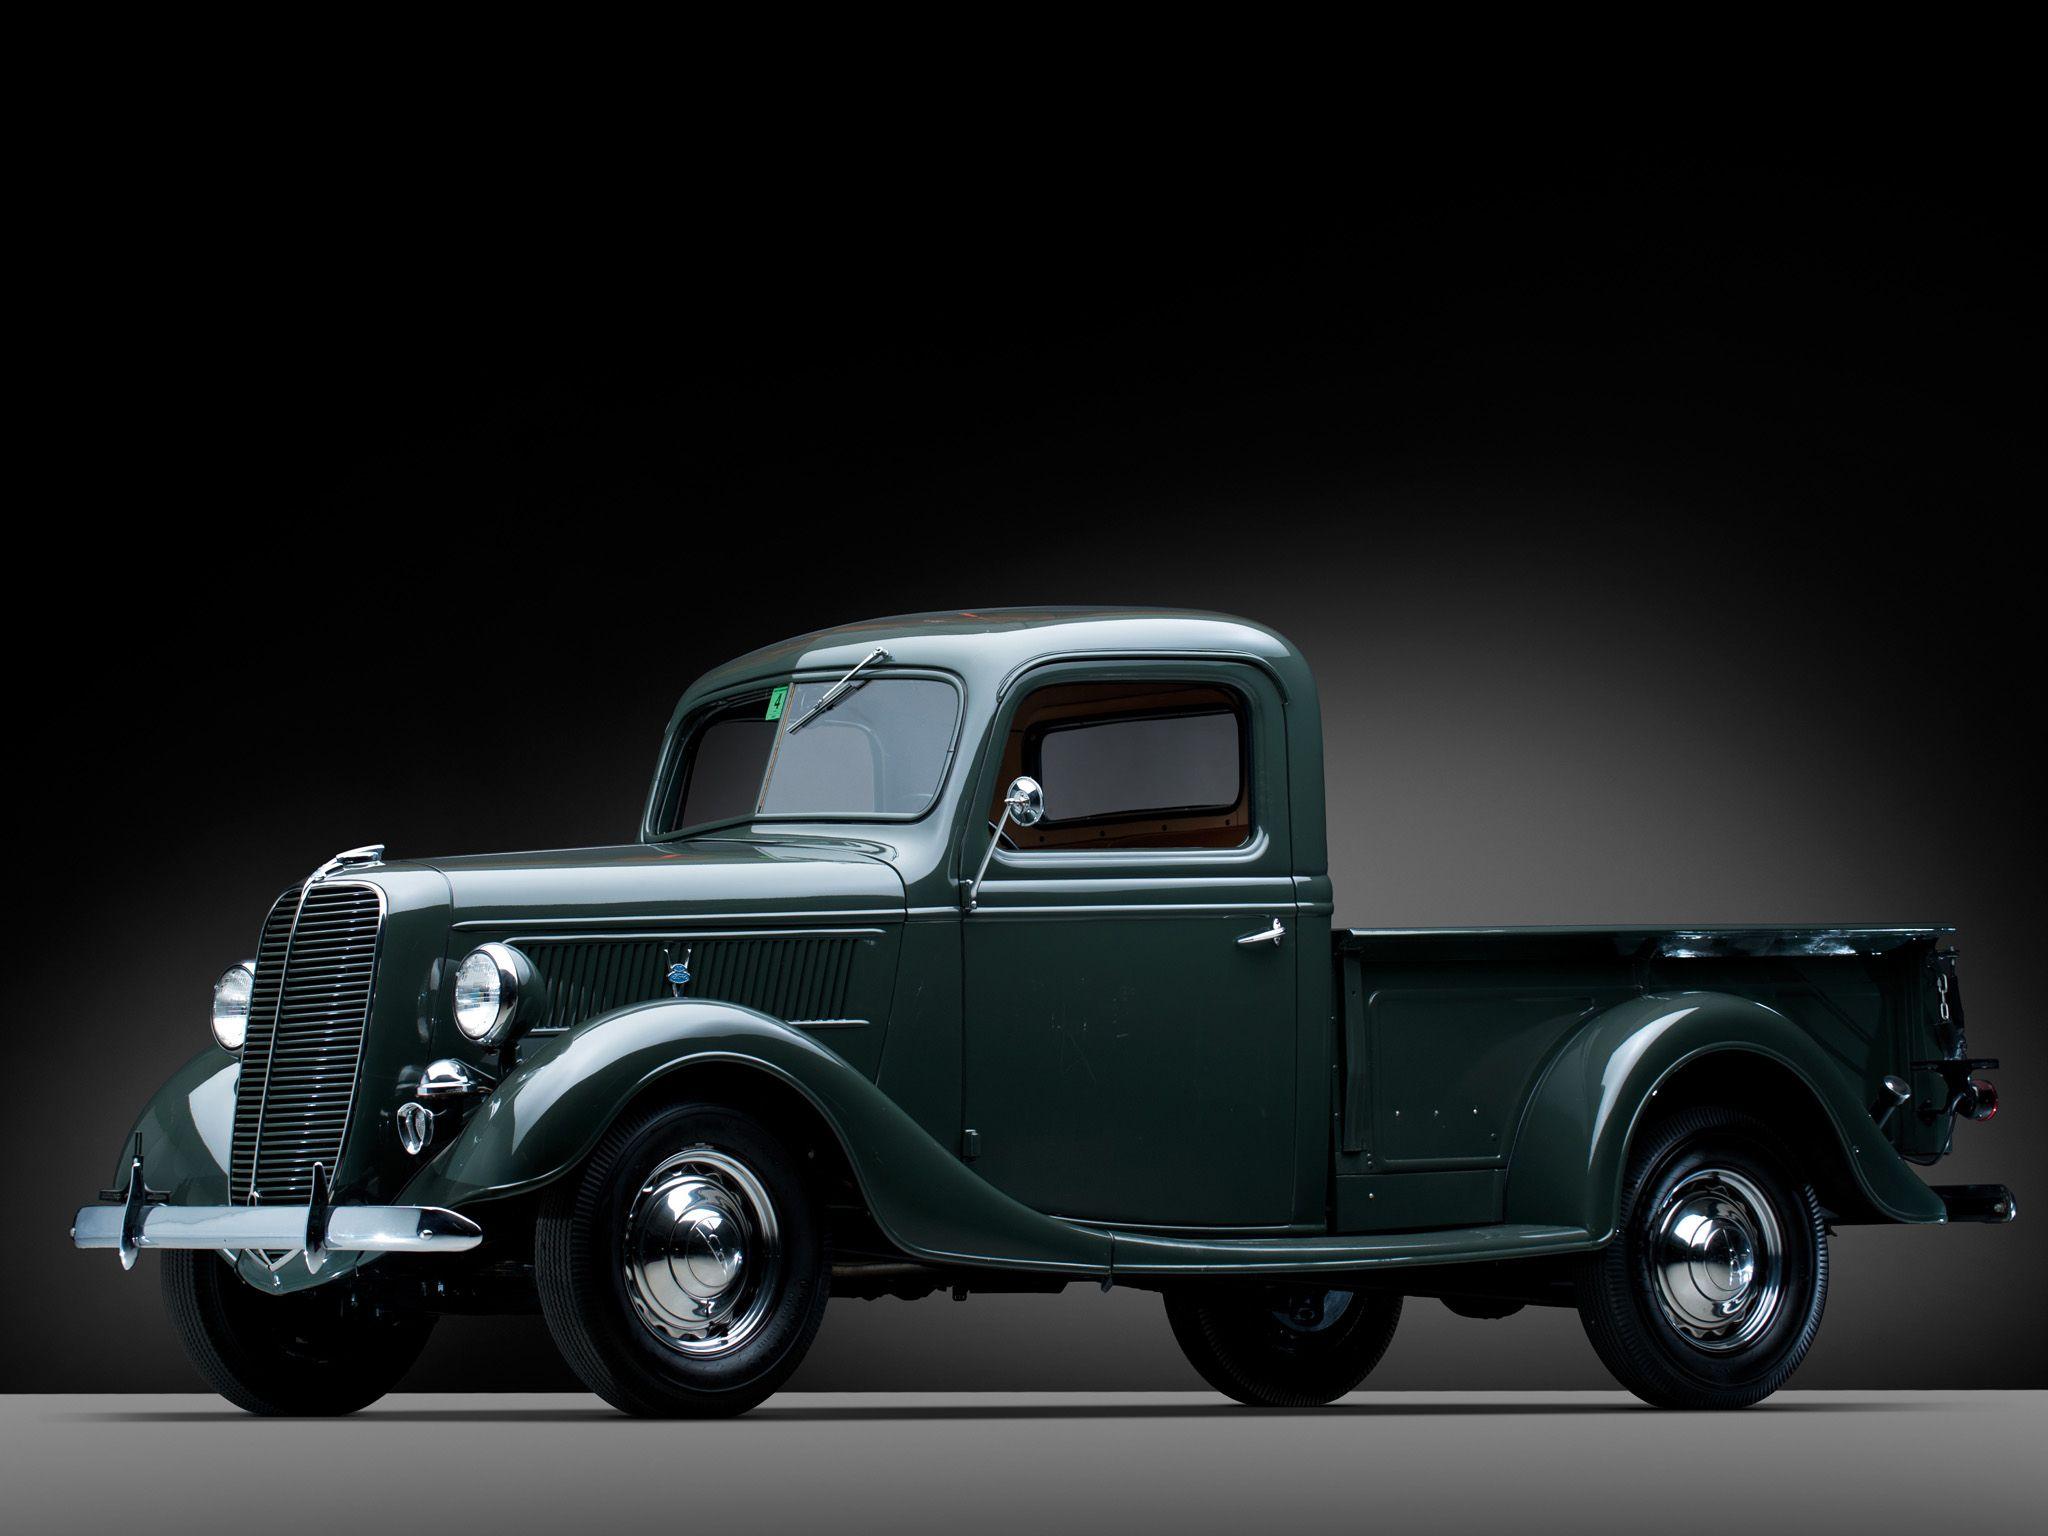 Ford Truck Wallpapers.